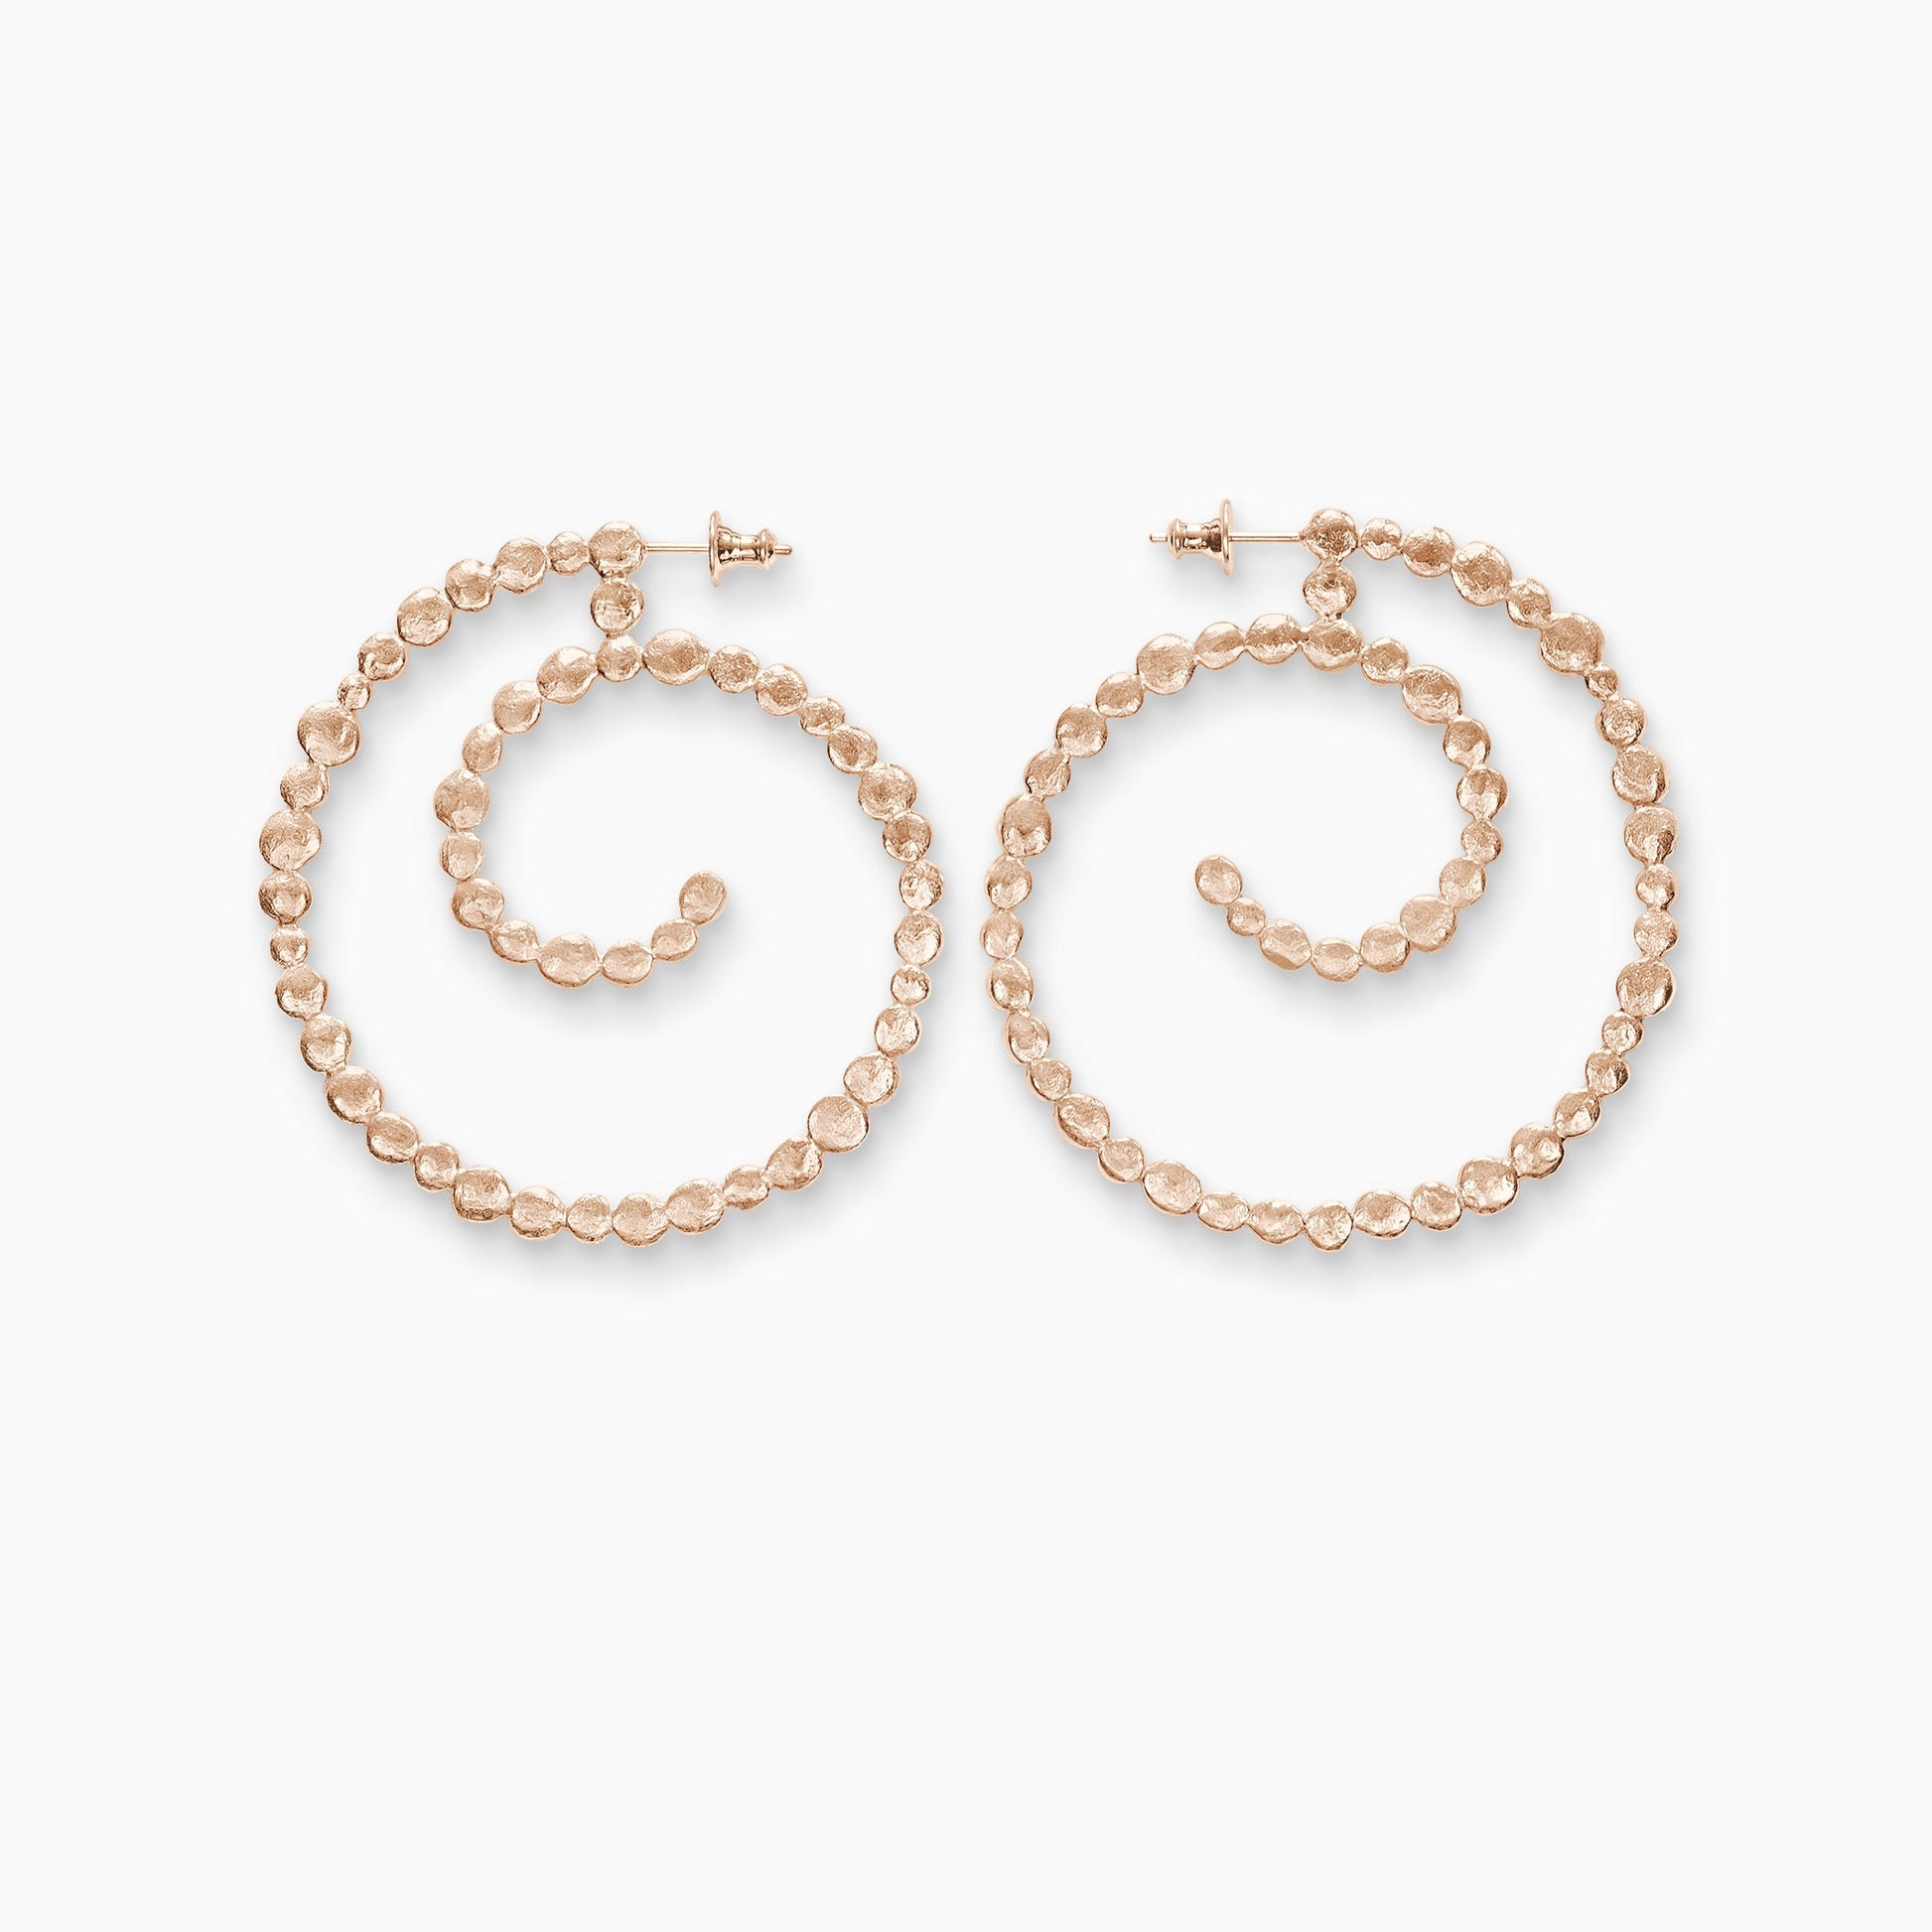 A pair of 18ct Fairtrade rose gold spiral stud earrings made of tiny undulating textured and connected dots. 54mm outside diameter 